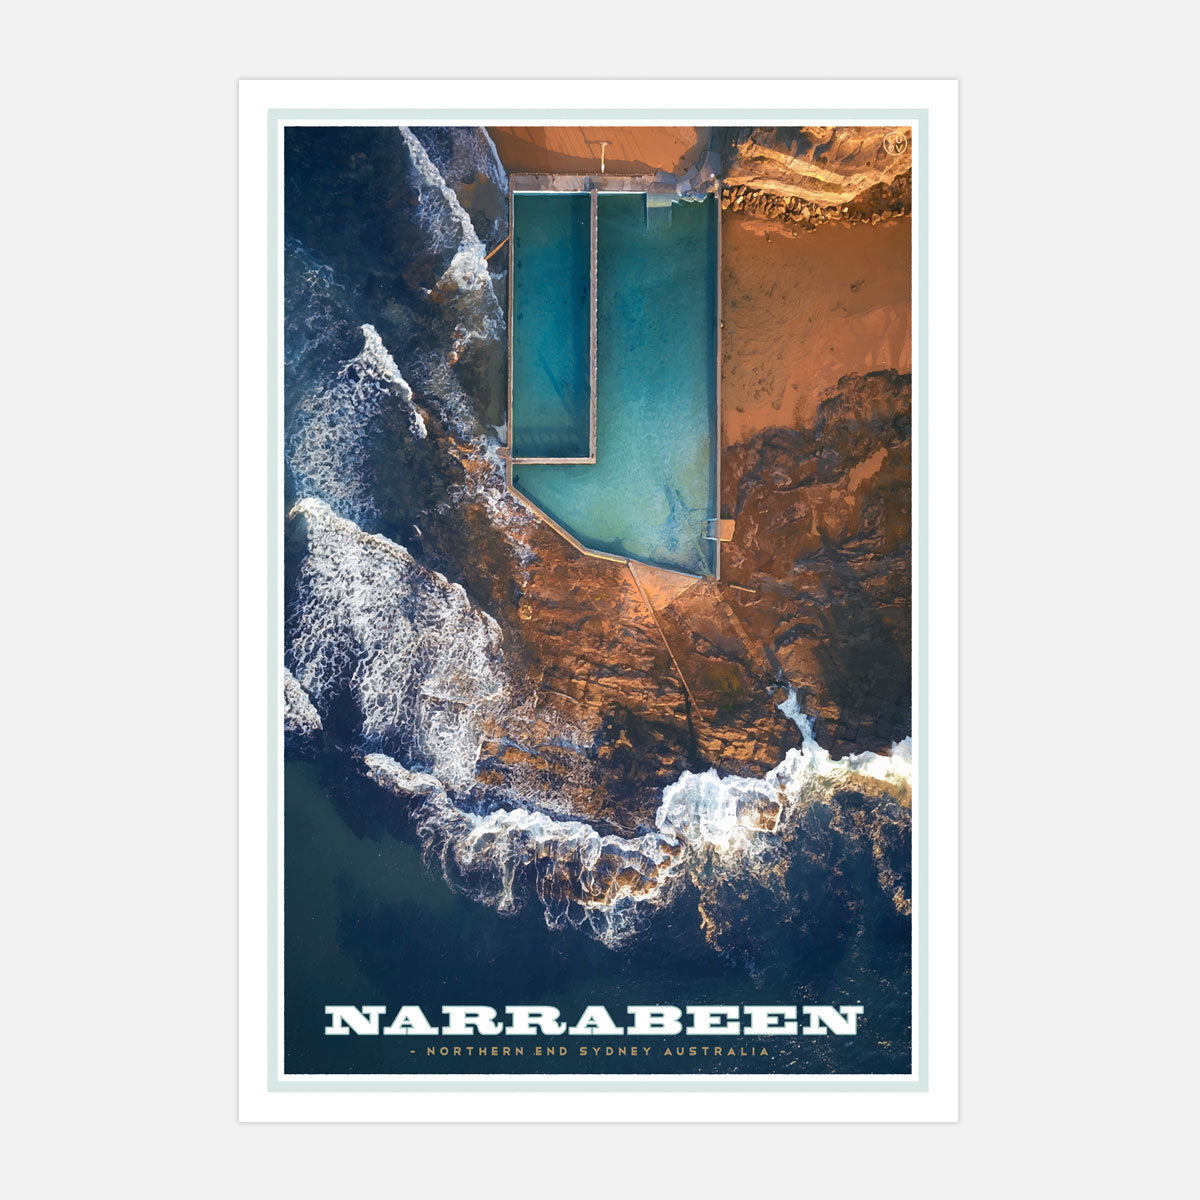 Narrabeen vintage travel style print by places we luv